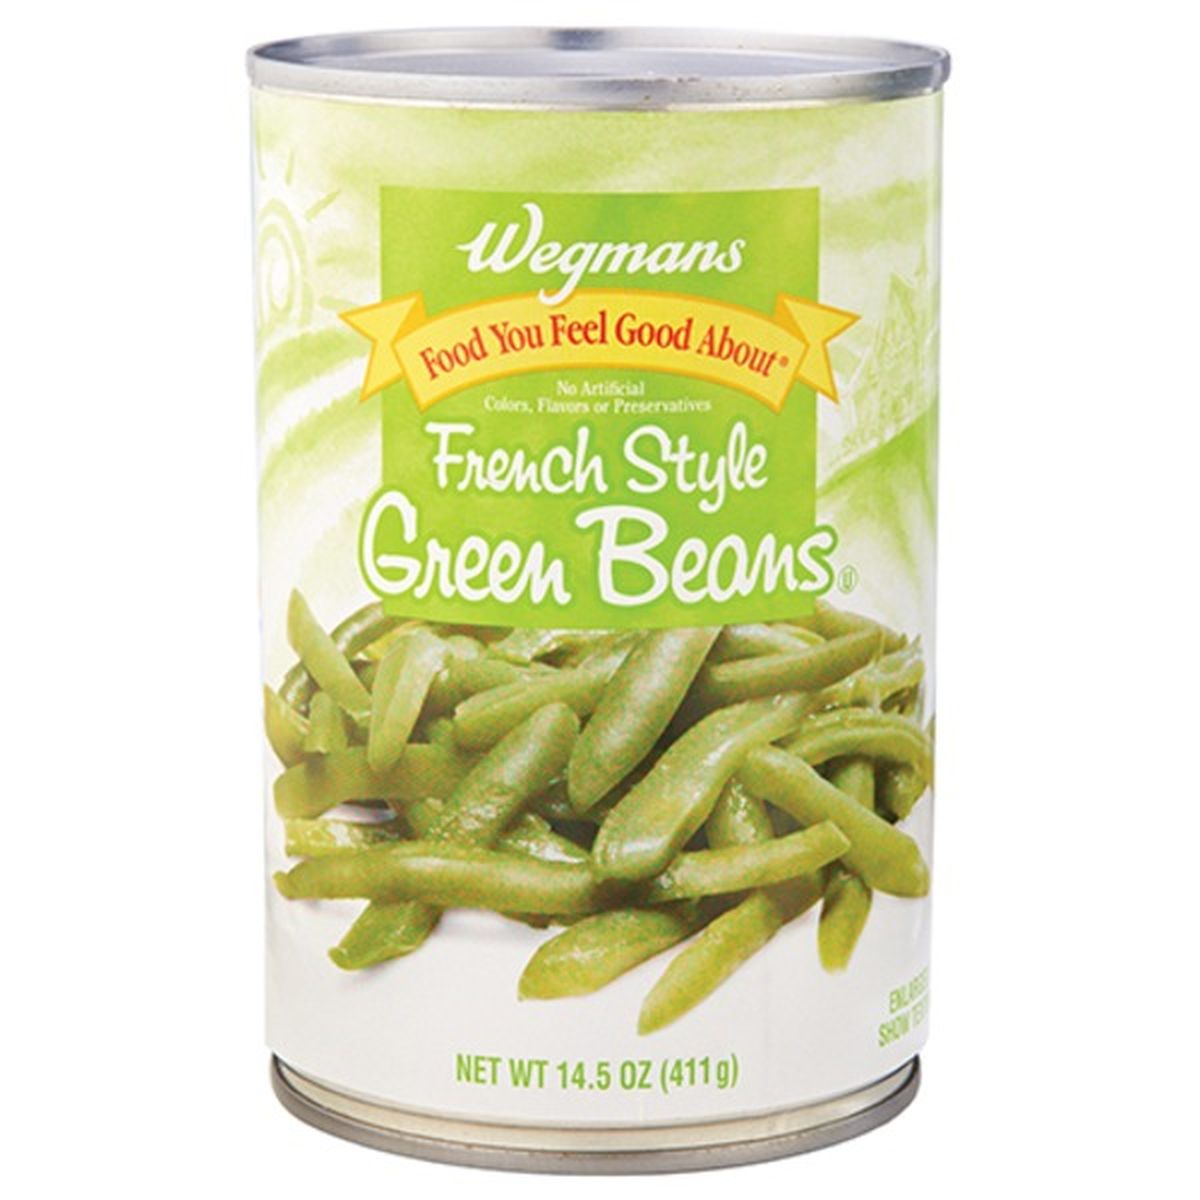 Calories in Wegmans French Style Green Beans